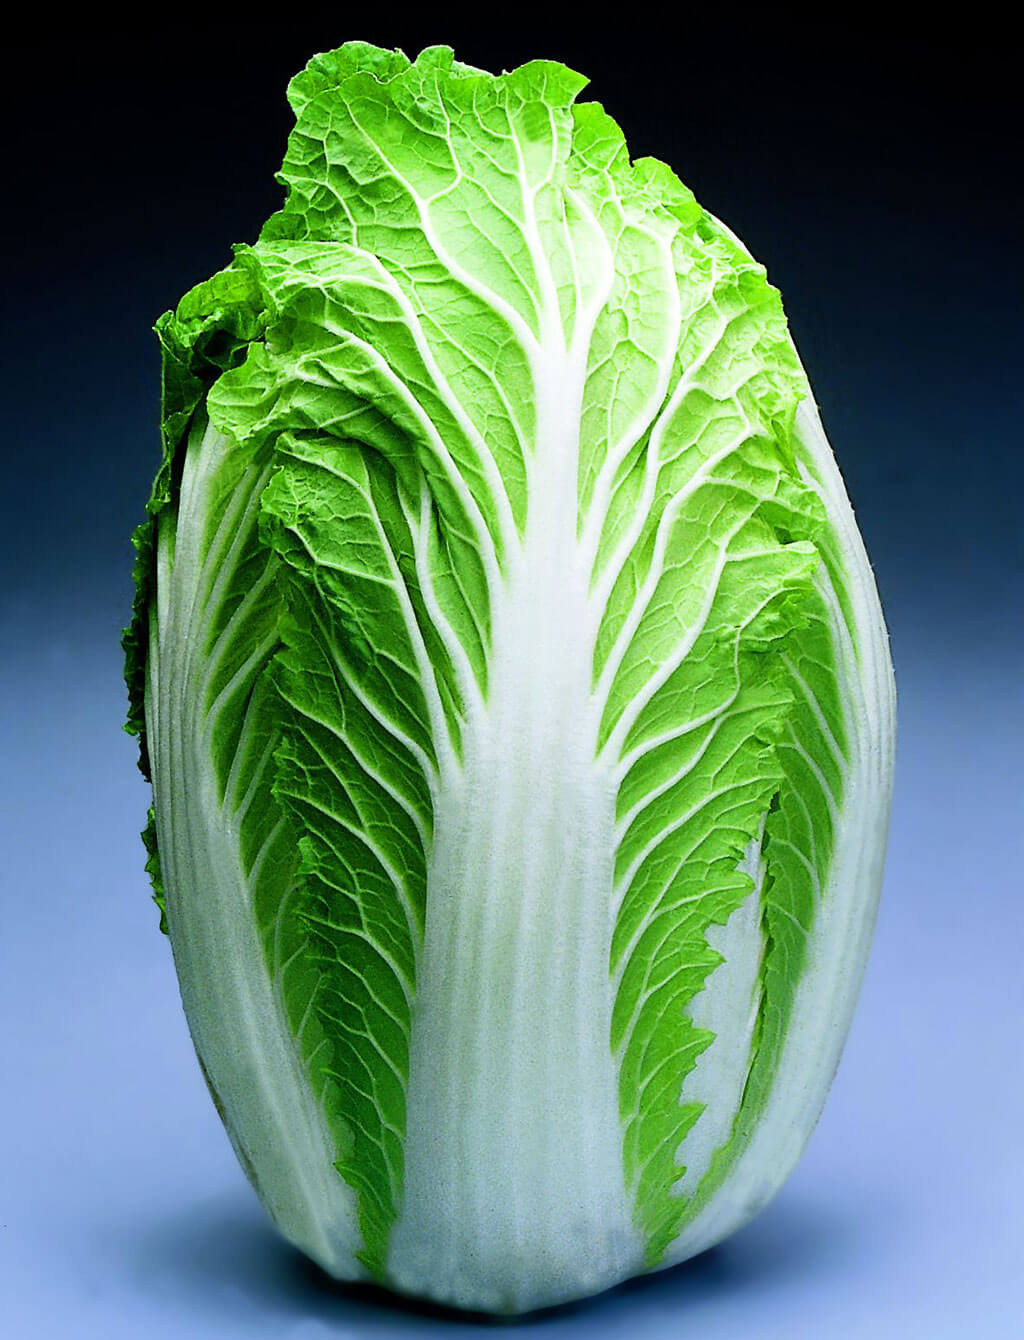 Chinese Napa Cabbage Recipes
 Chinese Napa Cabbage Mild Flavor & Year Round Planting